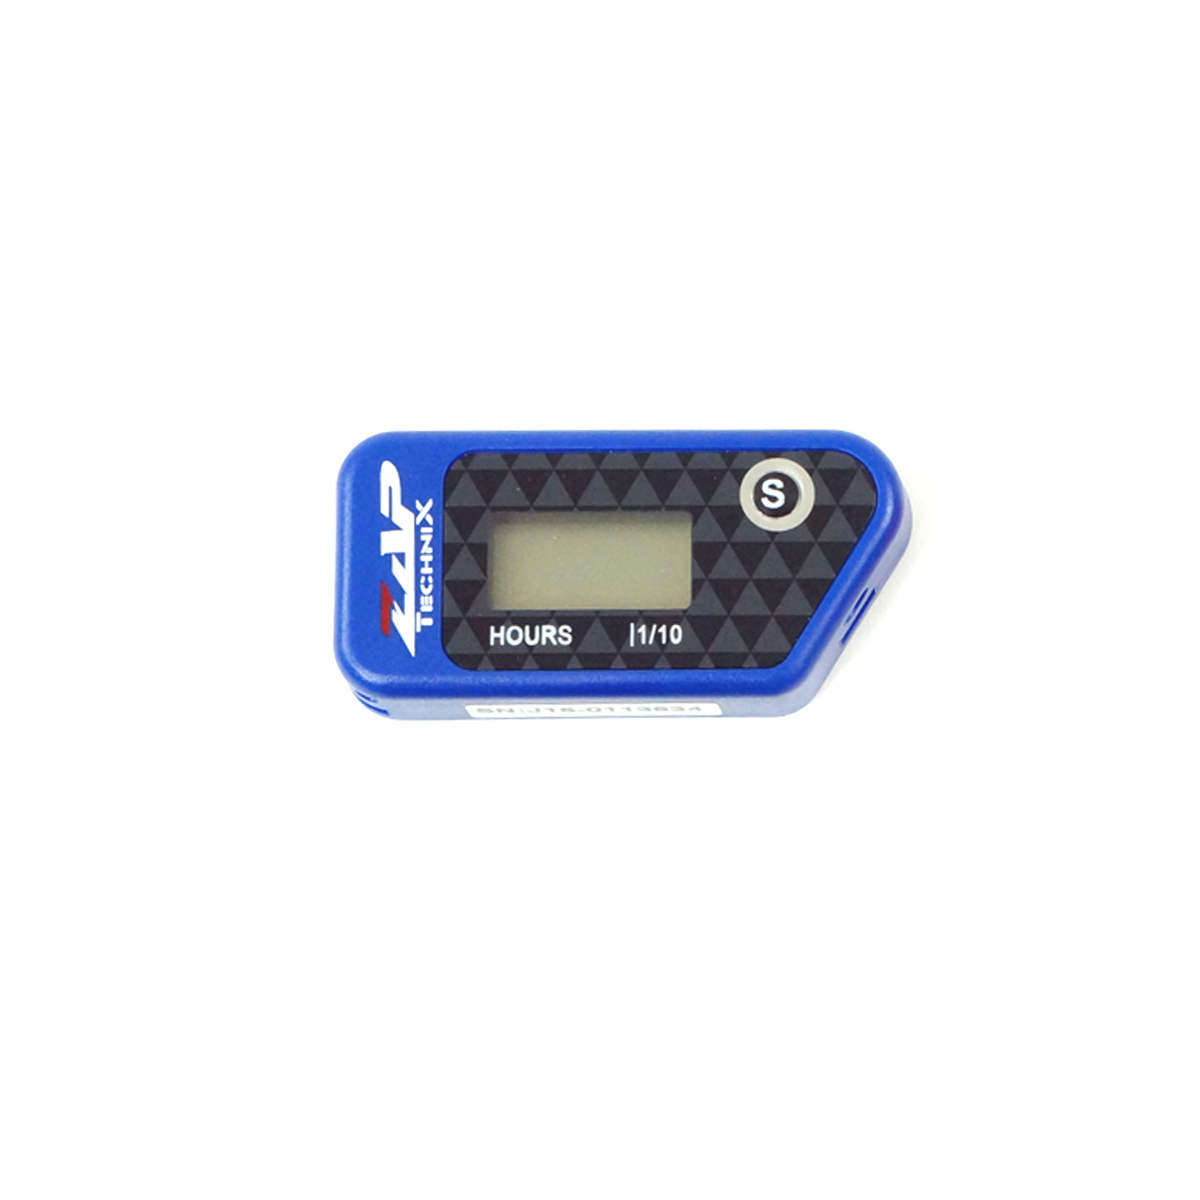 ZAP Contaore Master Wireless, resetable, Blue